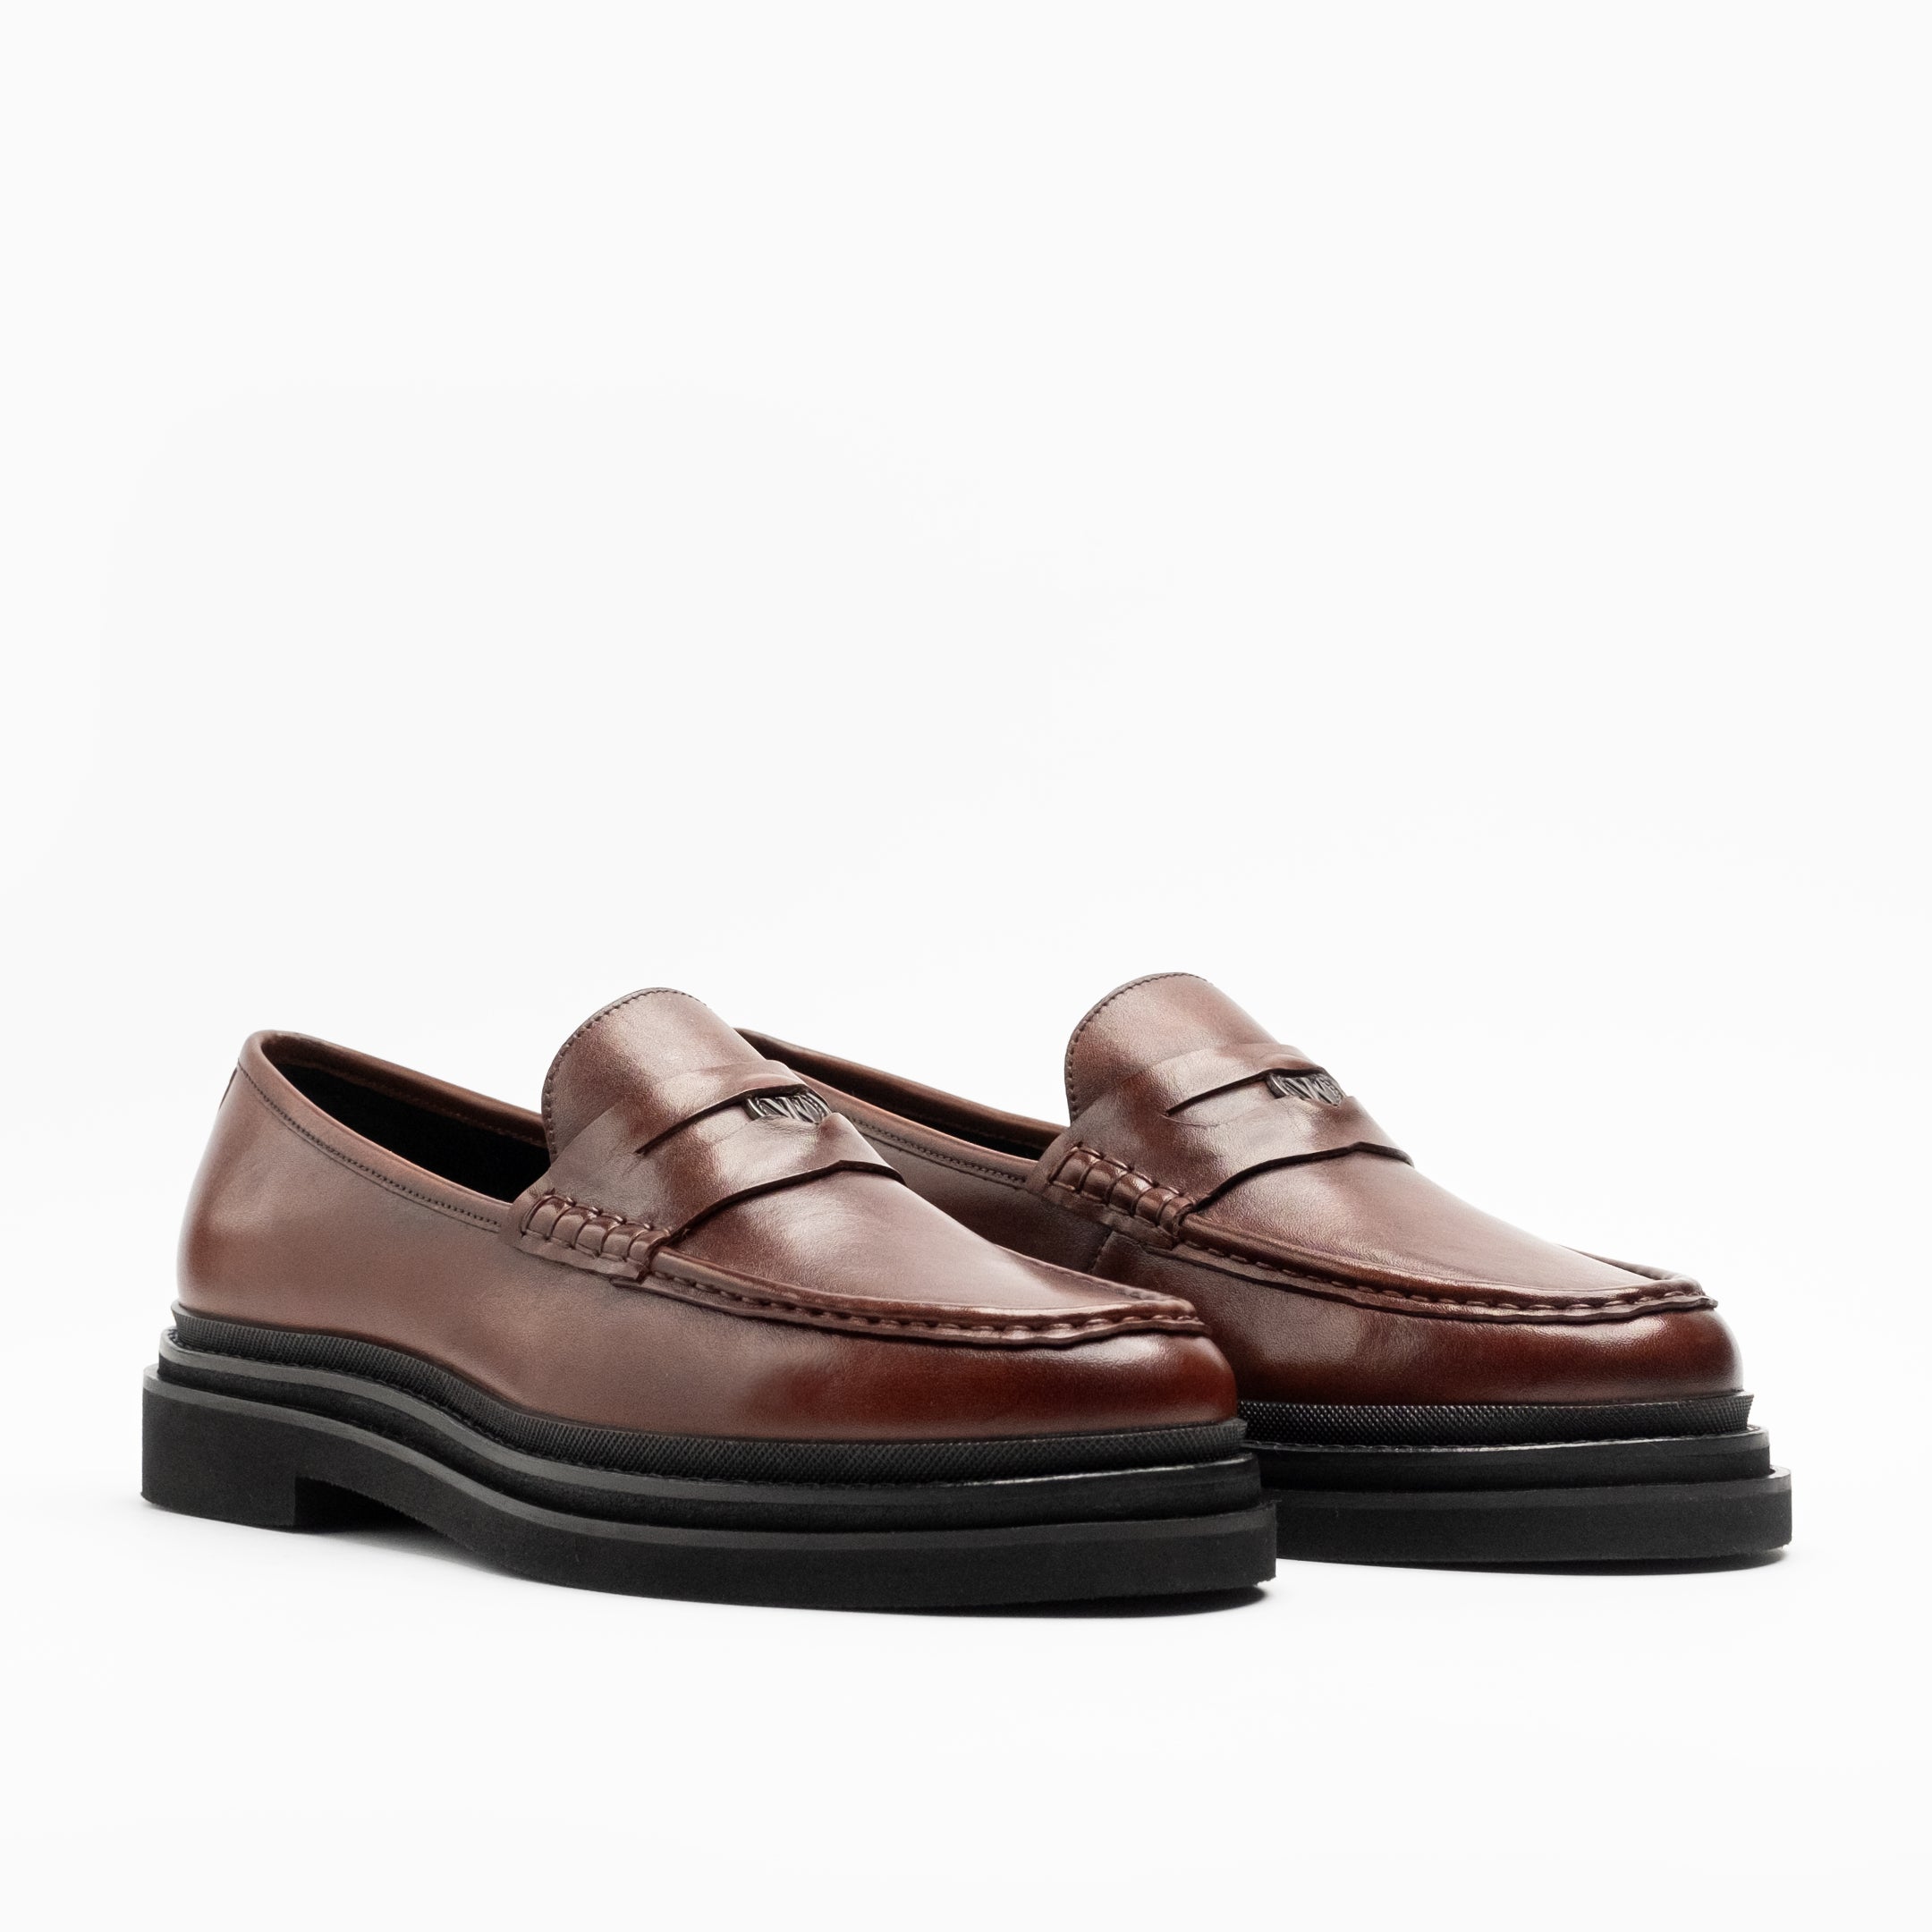 Walk London Mens Brooklyn Penny Loafer in Brown Leather